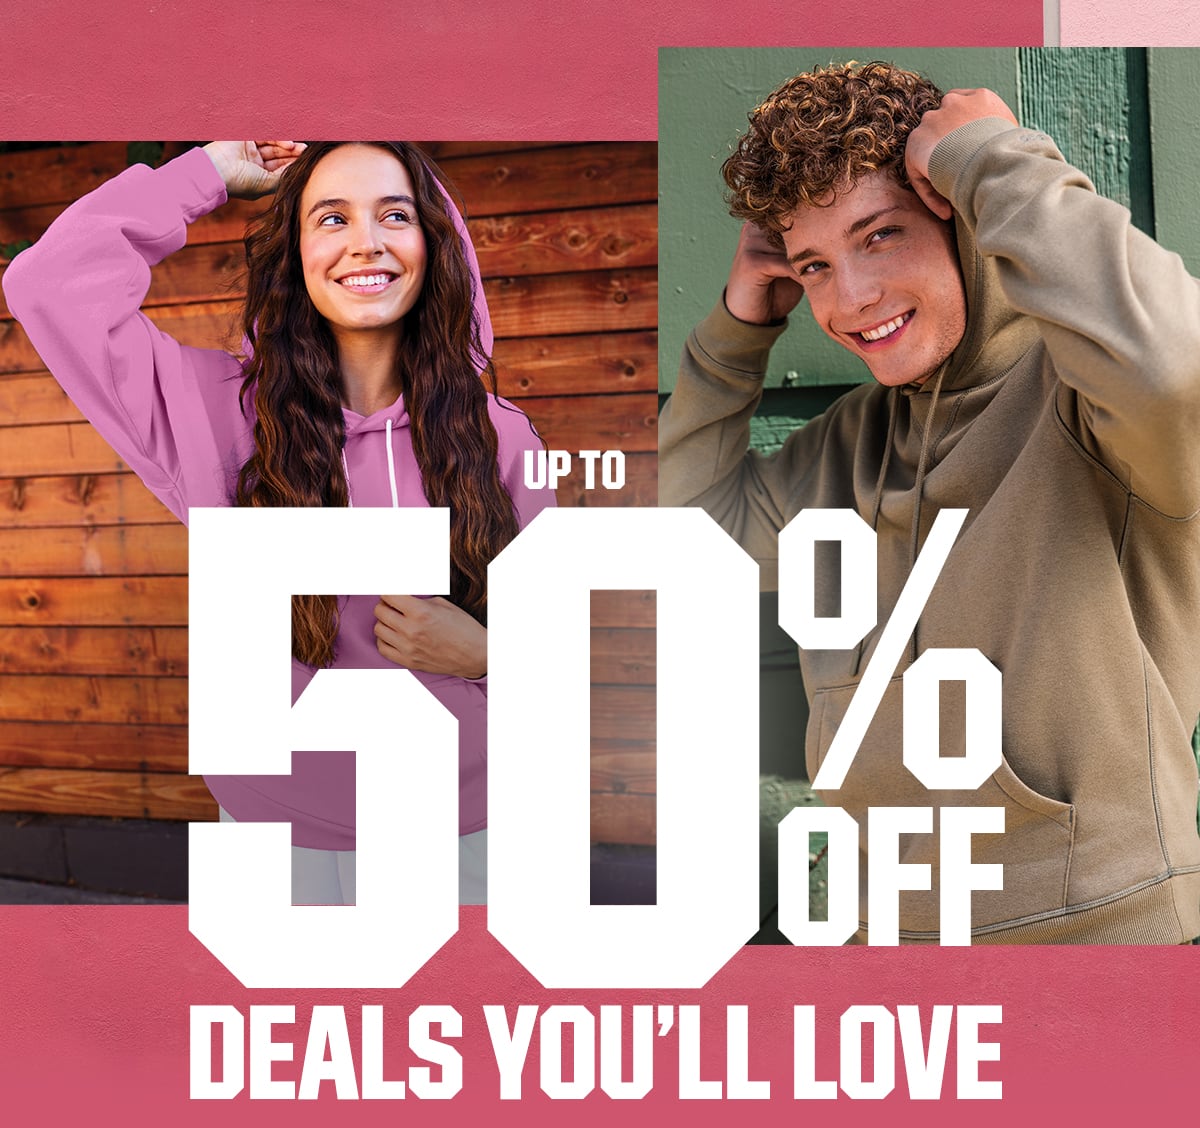 Up to 50% off deals you'll love.